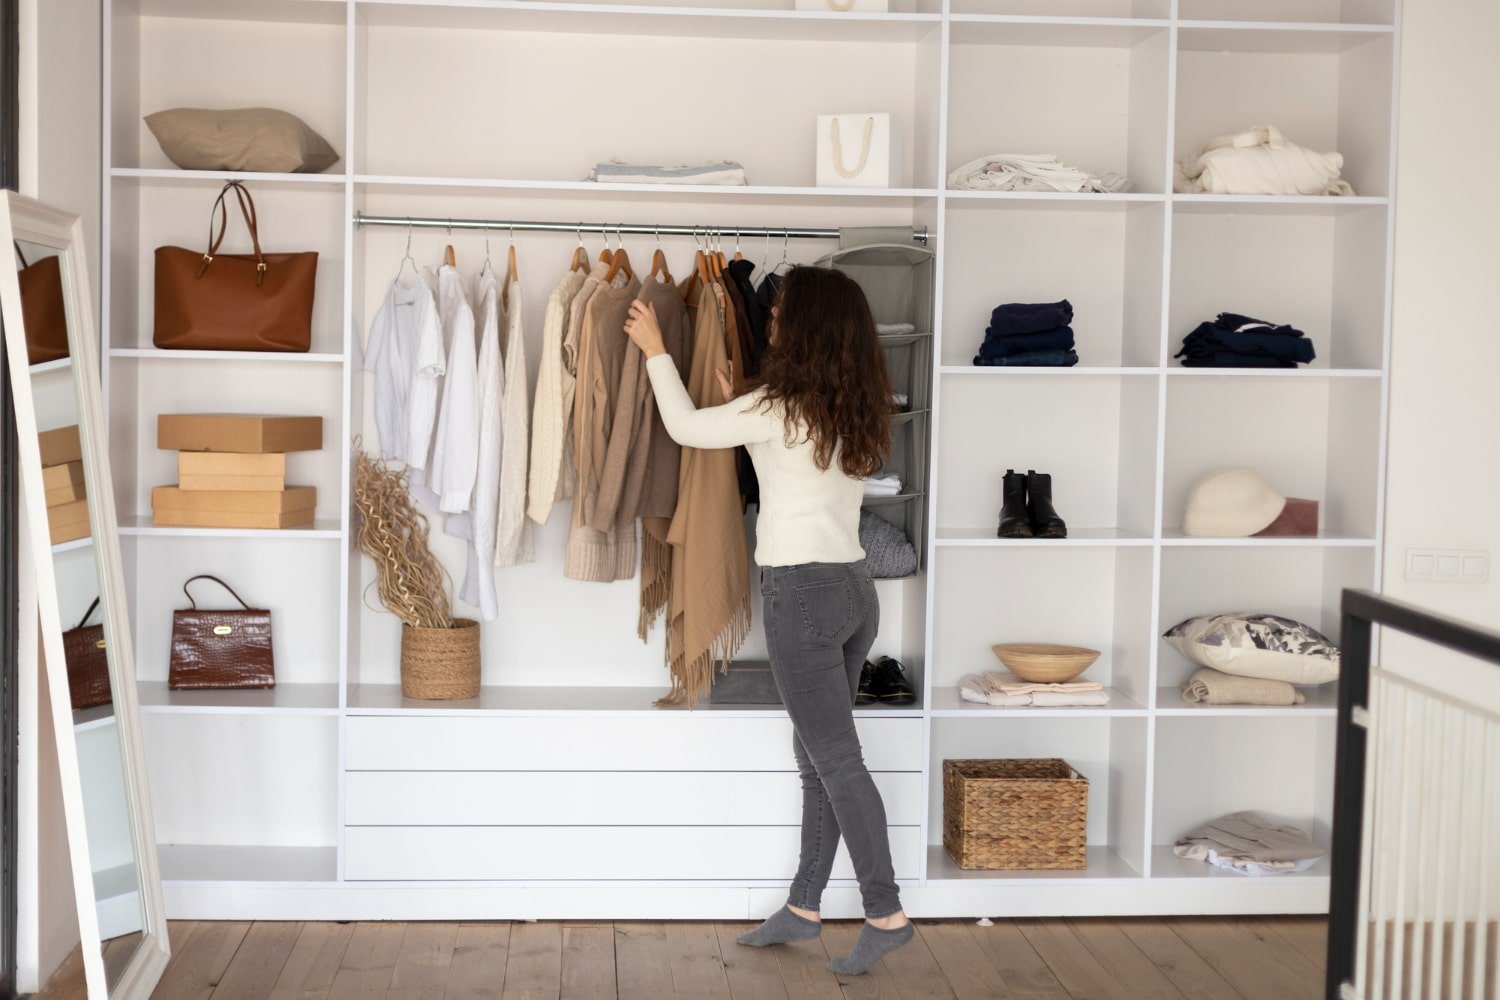 You are currently viewing California Closets – U.S. Custom Closet Transformations